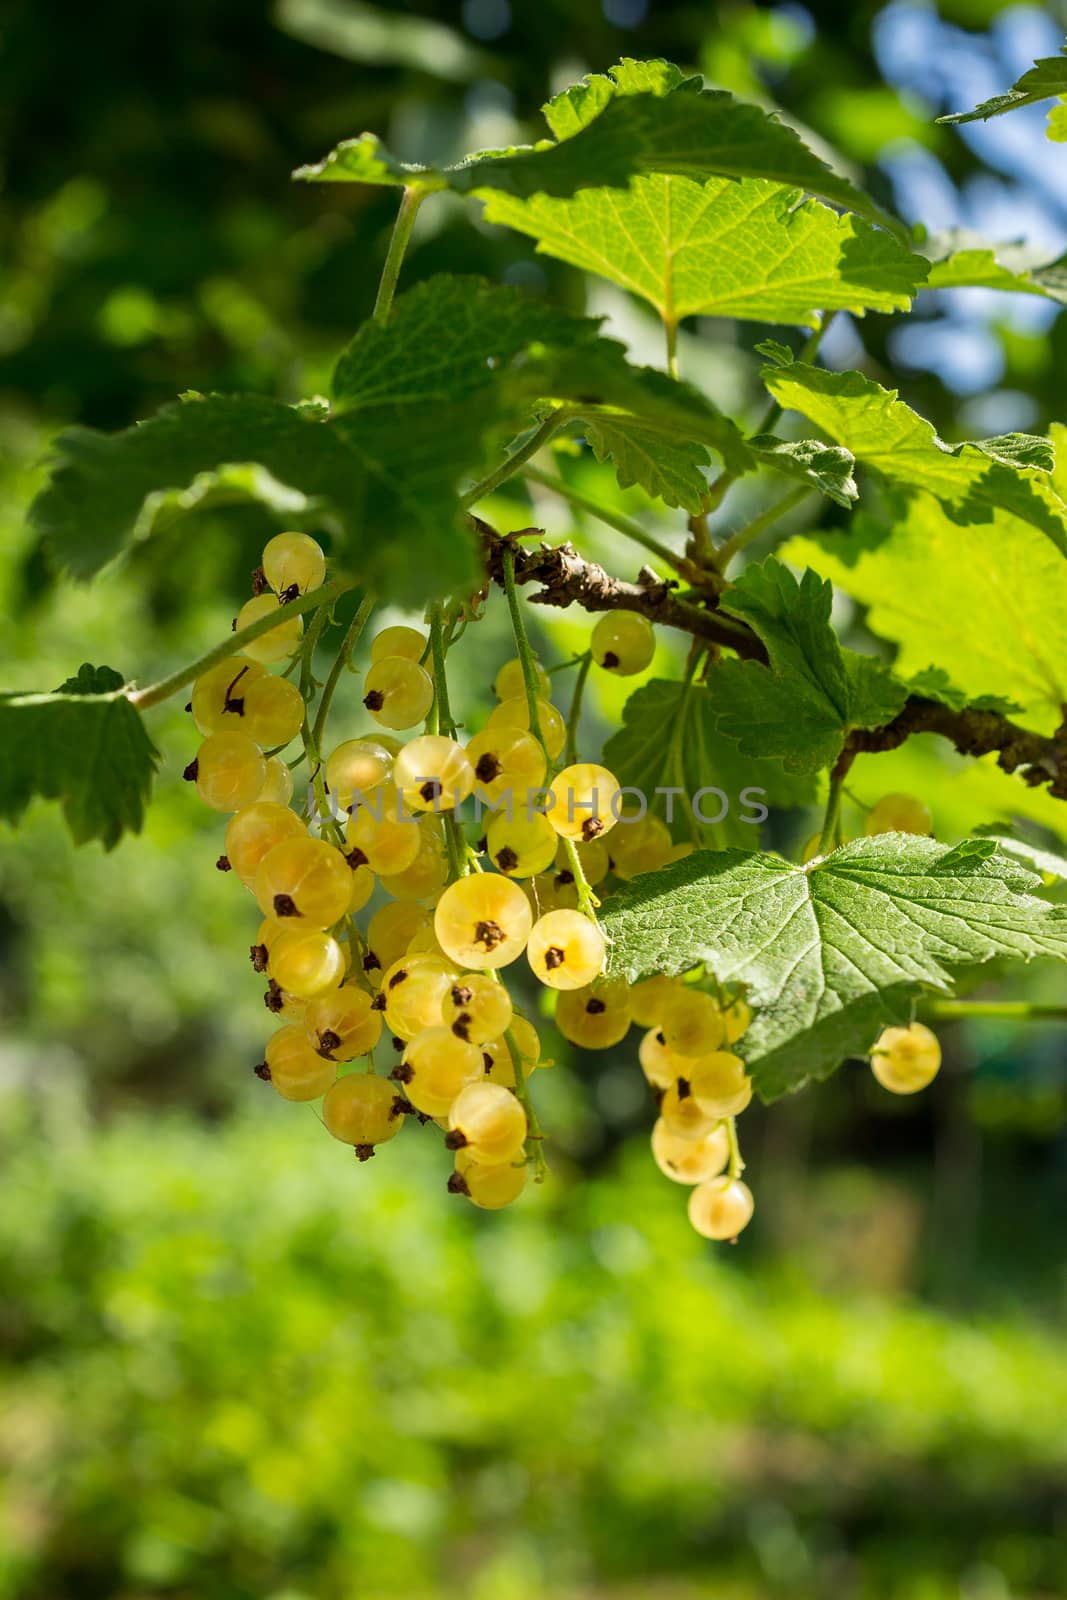 juicy fruit white currants on a hot summer day hanging on the branches on blurred background of garden